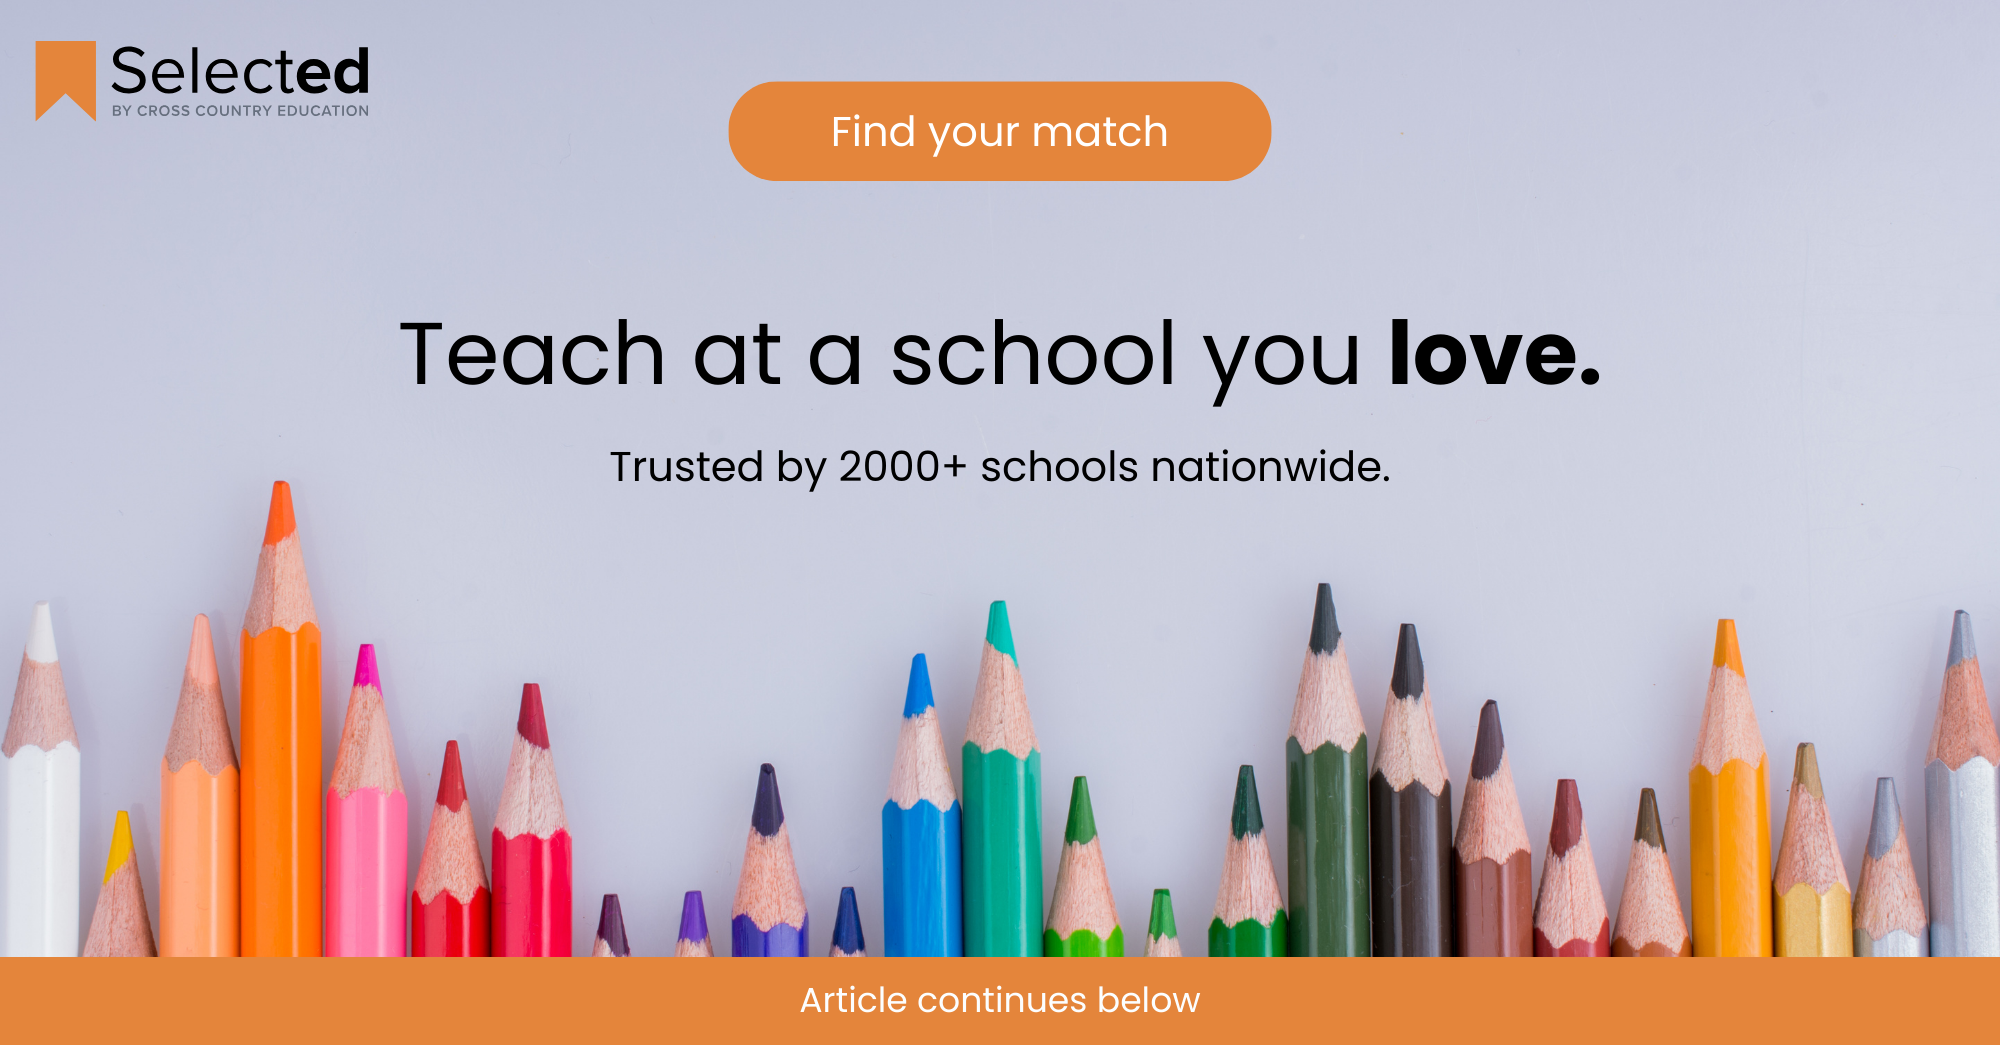 ghost-teacher-school-love-ad-article-continues-blue-3